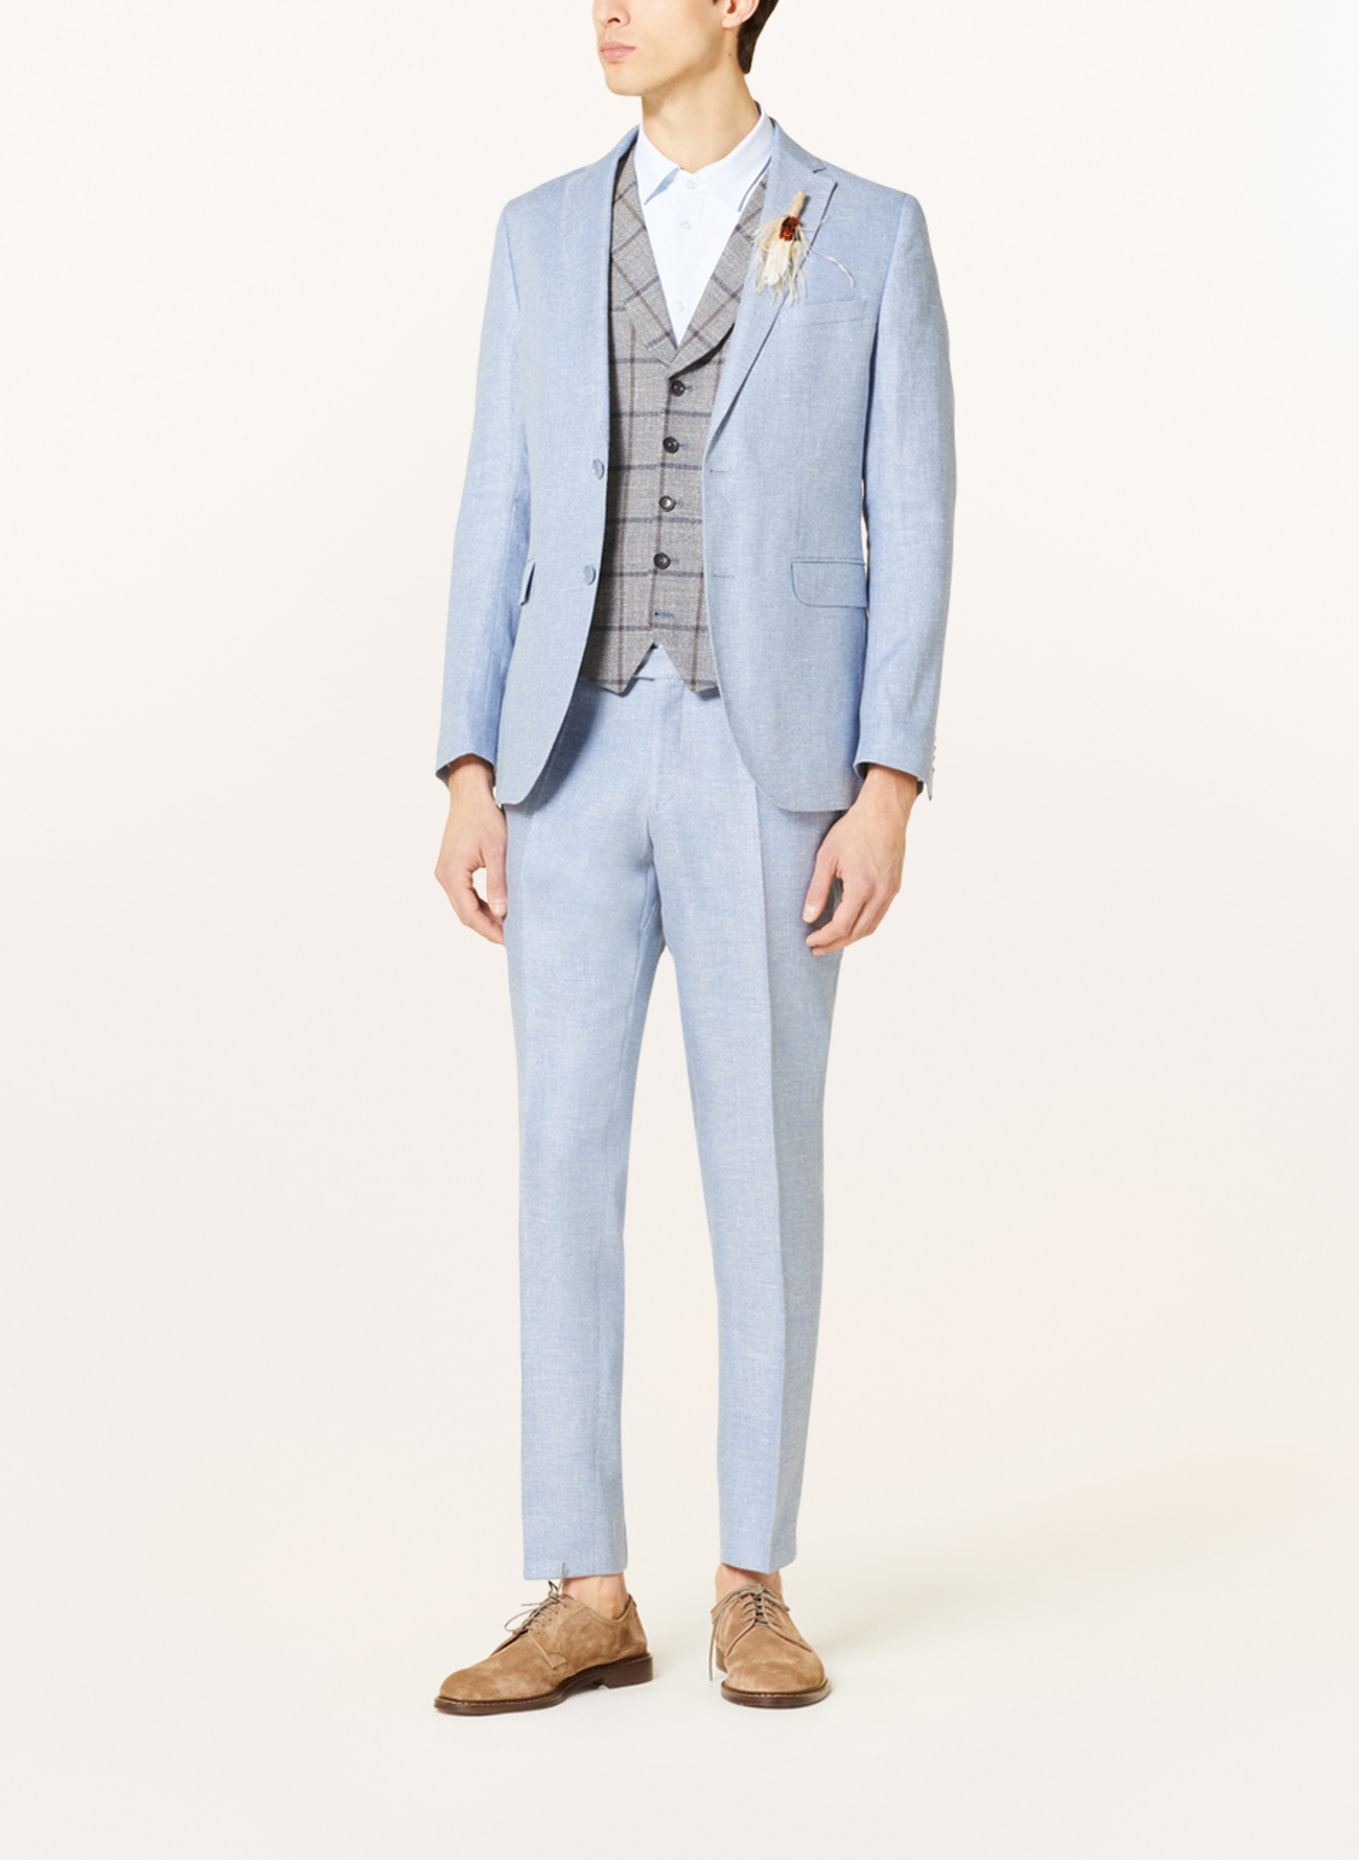 CG - CLUB of GENTS Suit jacket CG PAUL slim fit with linen, Color: 61 BLAU HELL (Image 2)